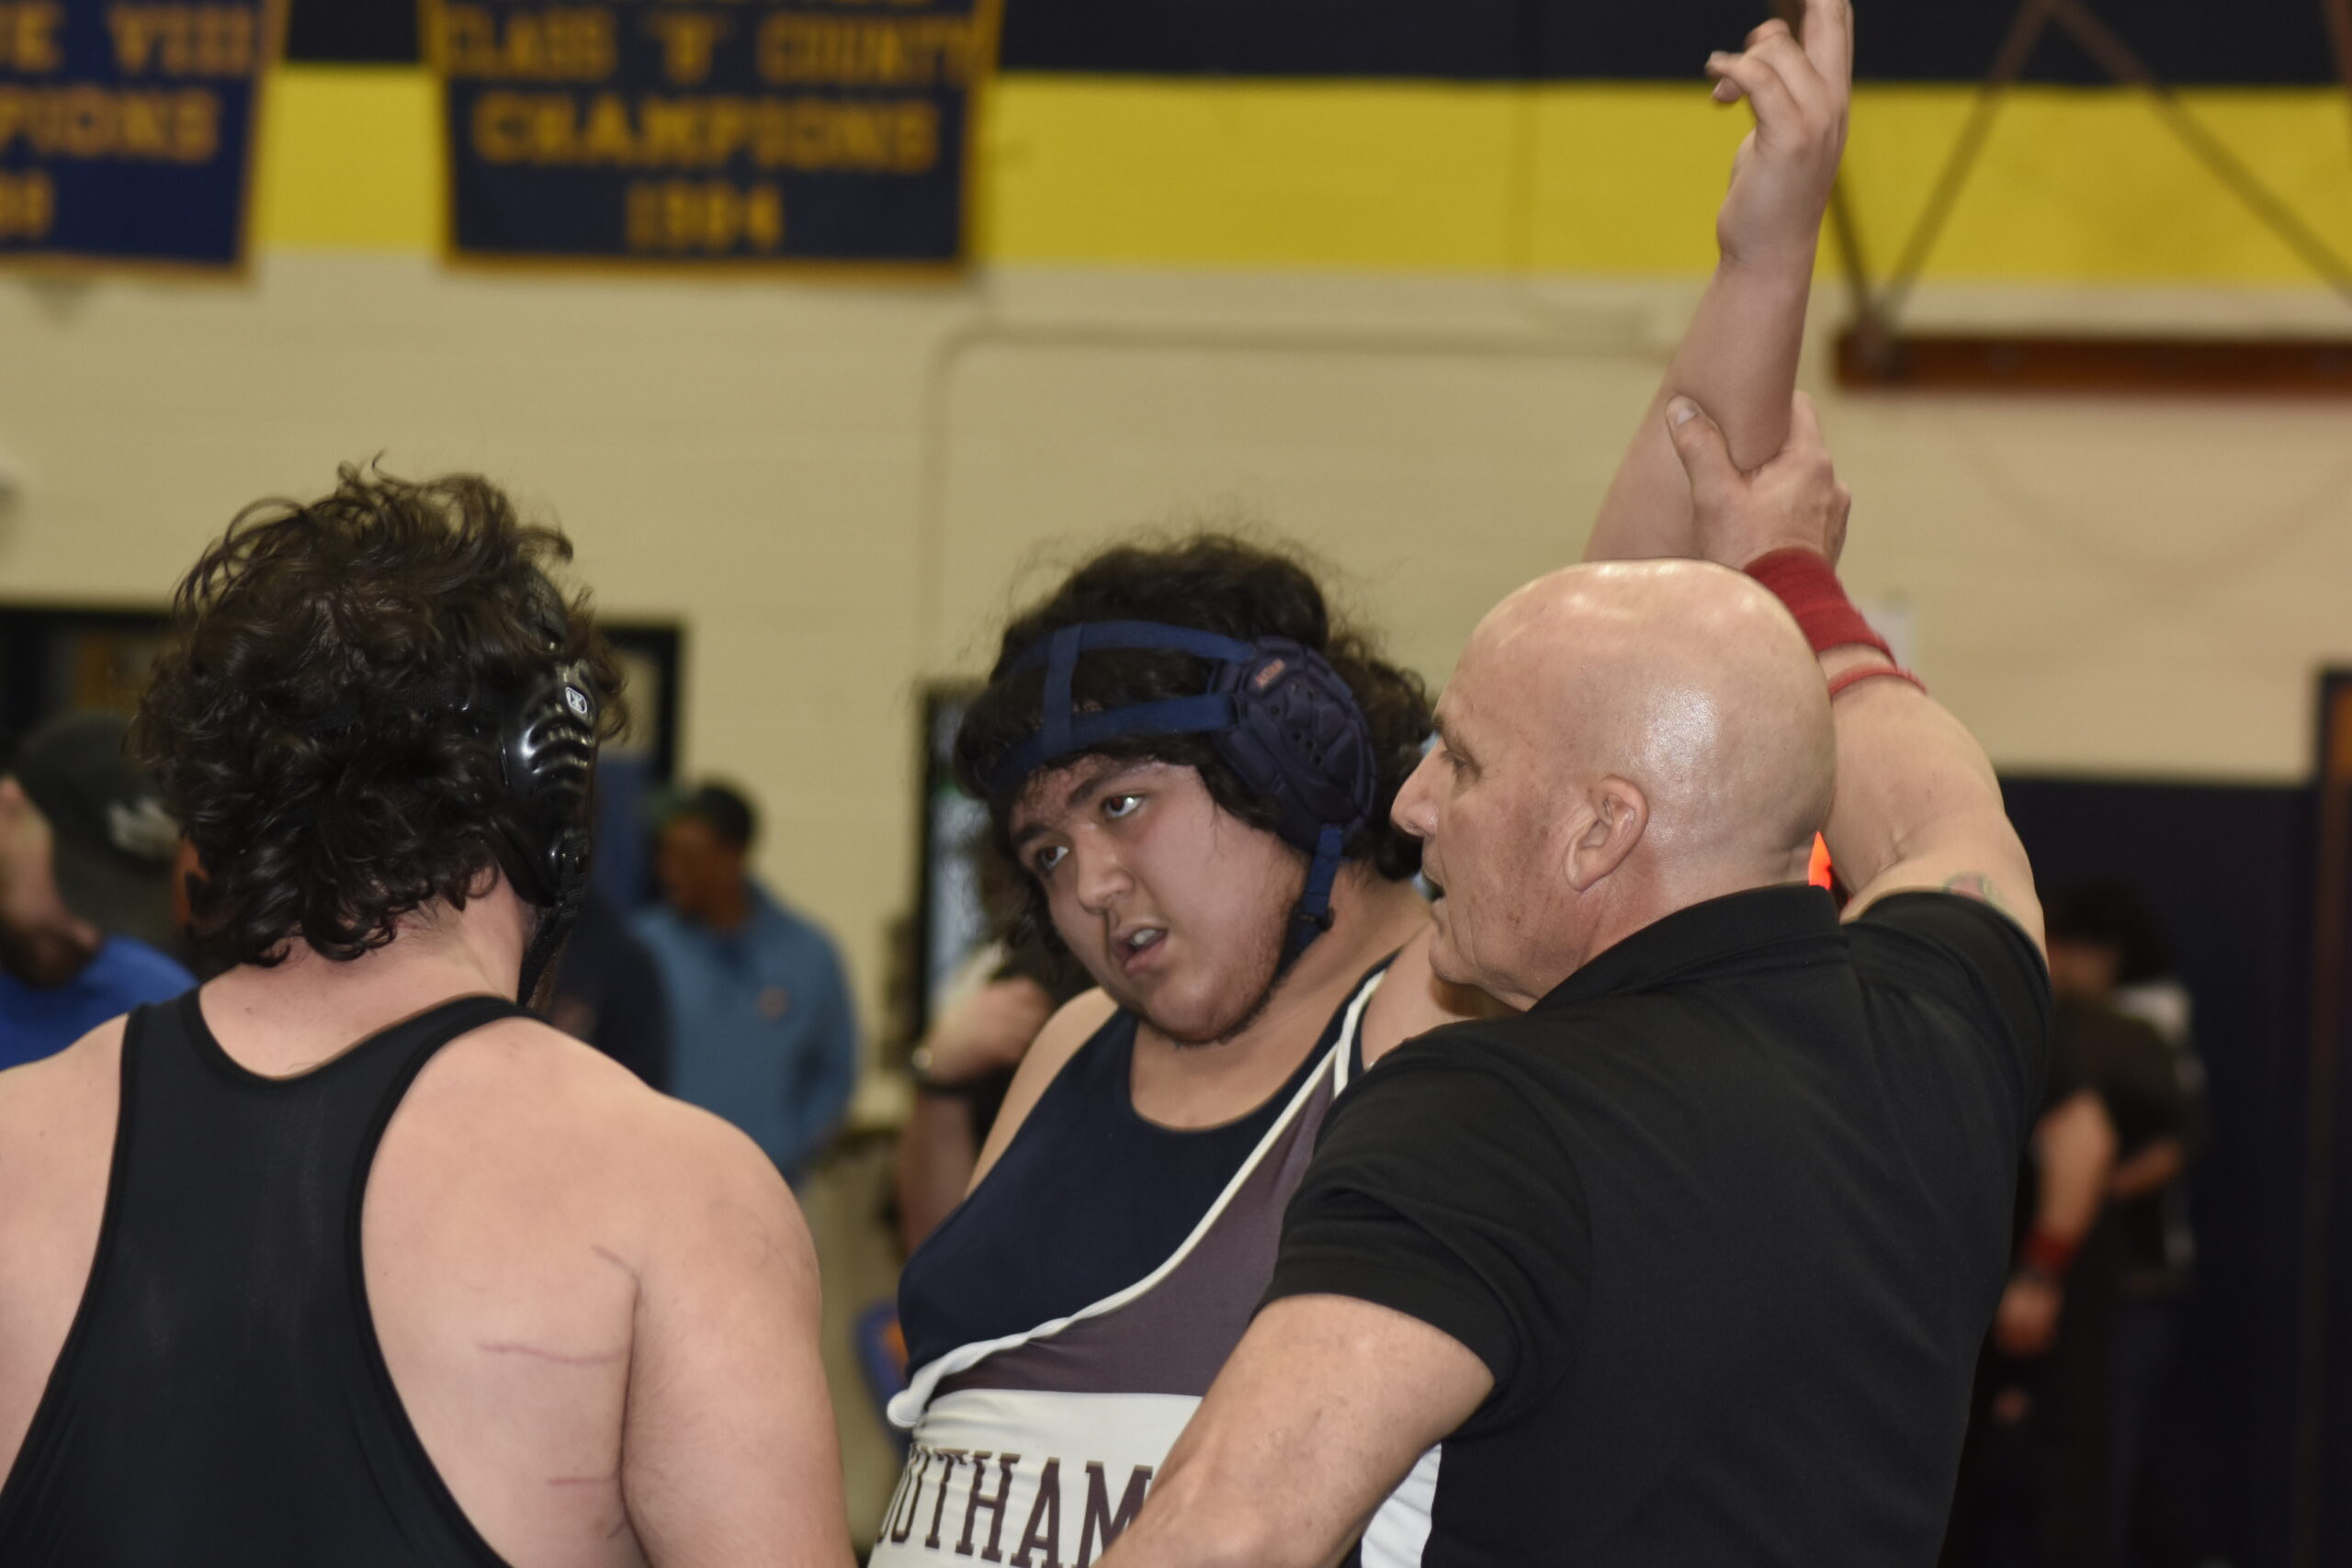 Southampton's David Castillo gets his arm raised after placing third in the county.   DREW BUDD